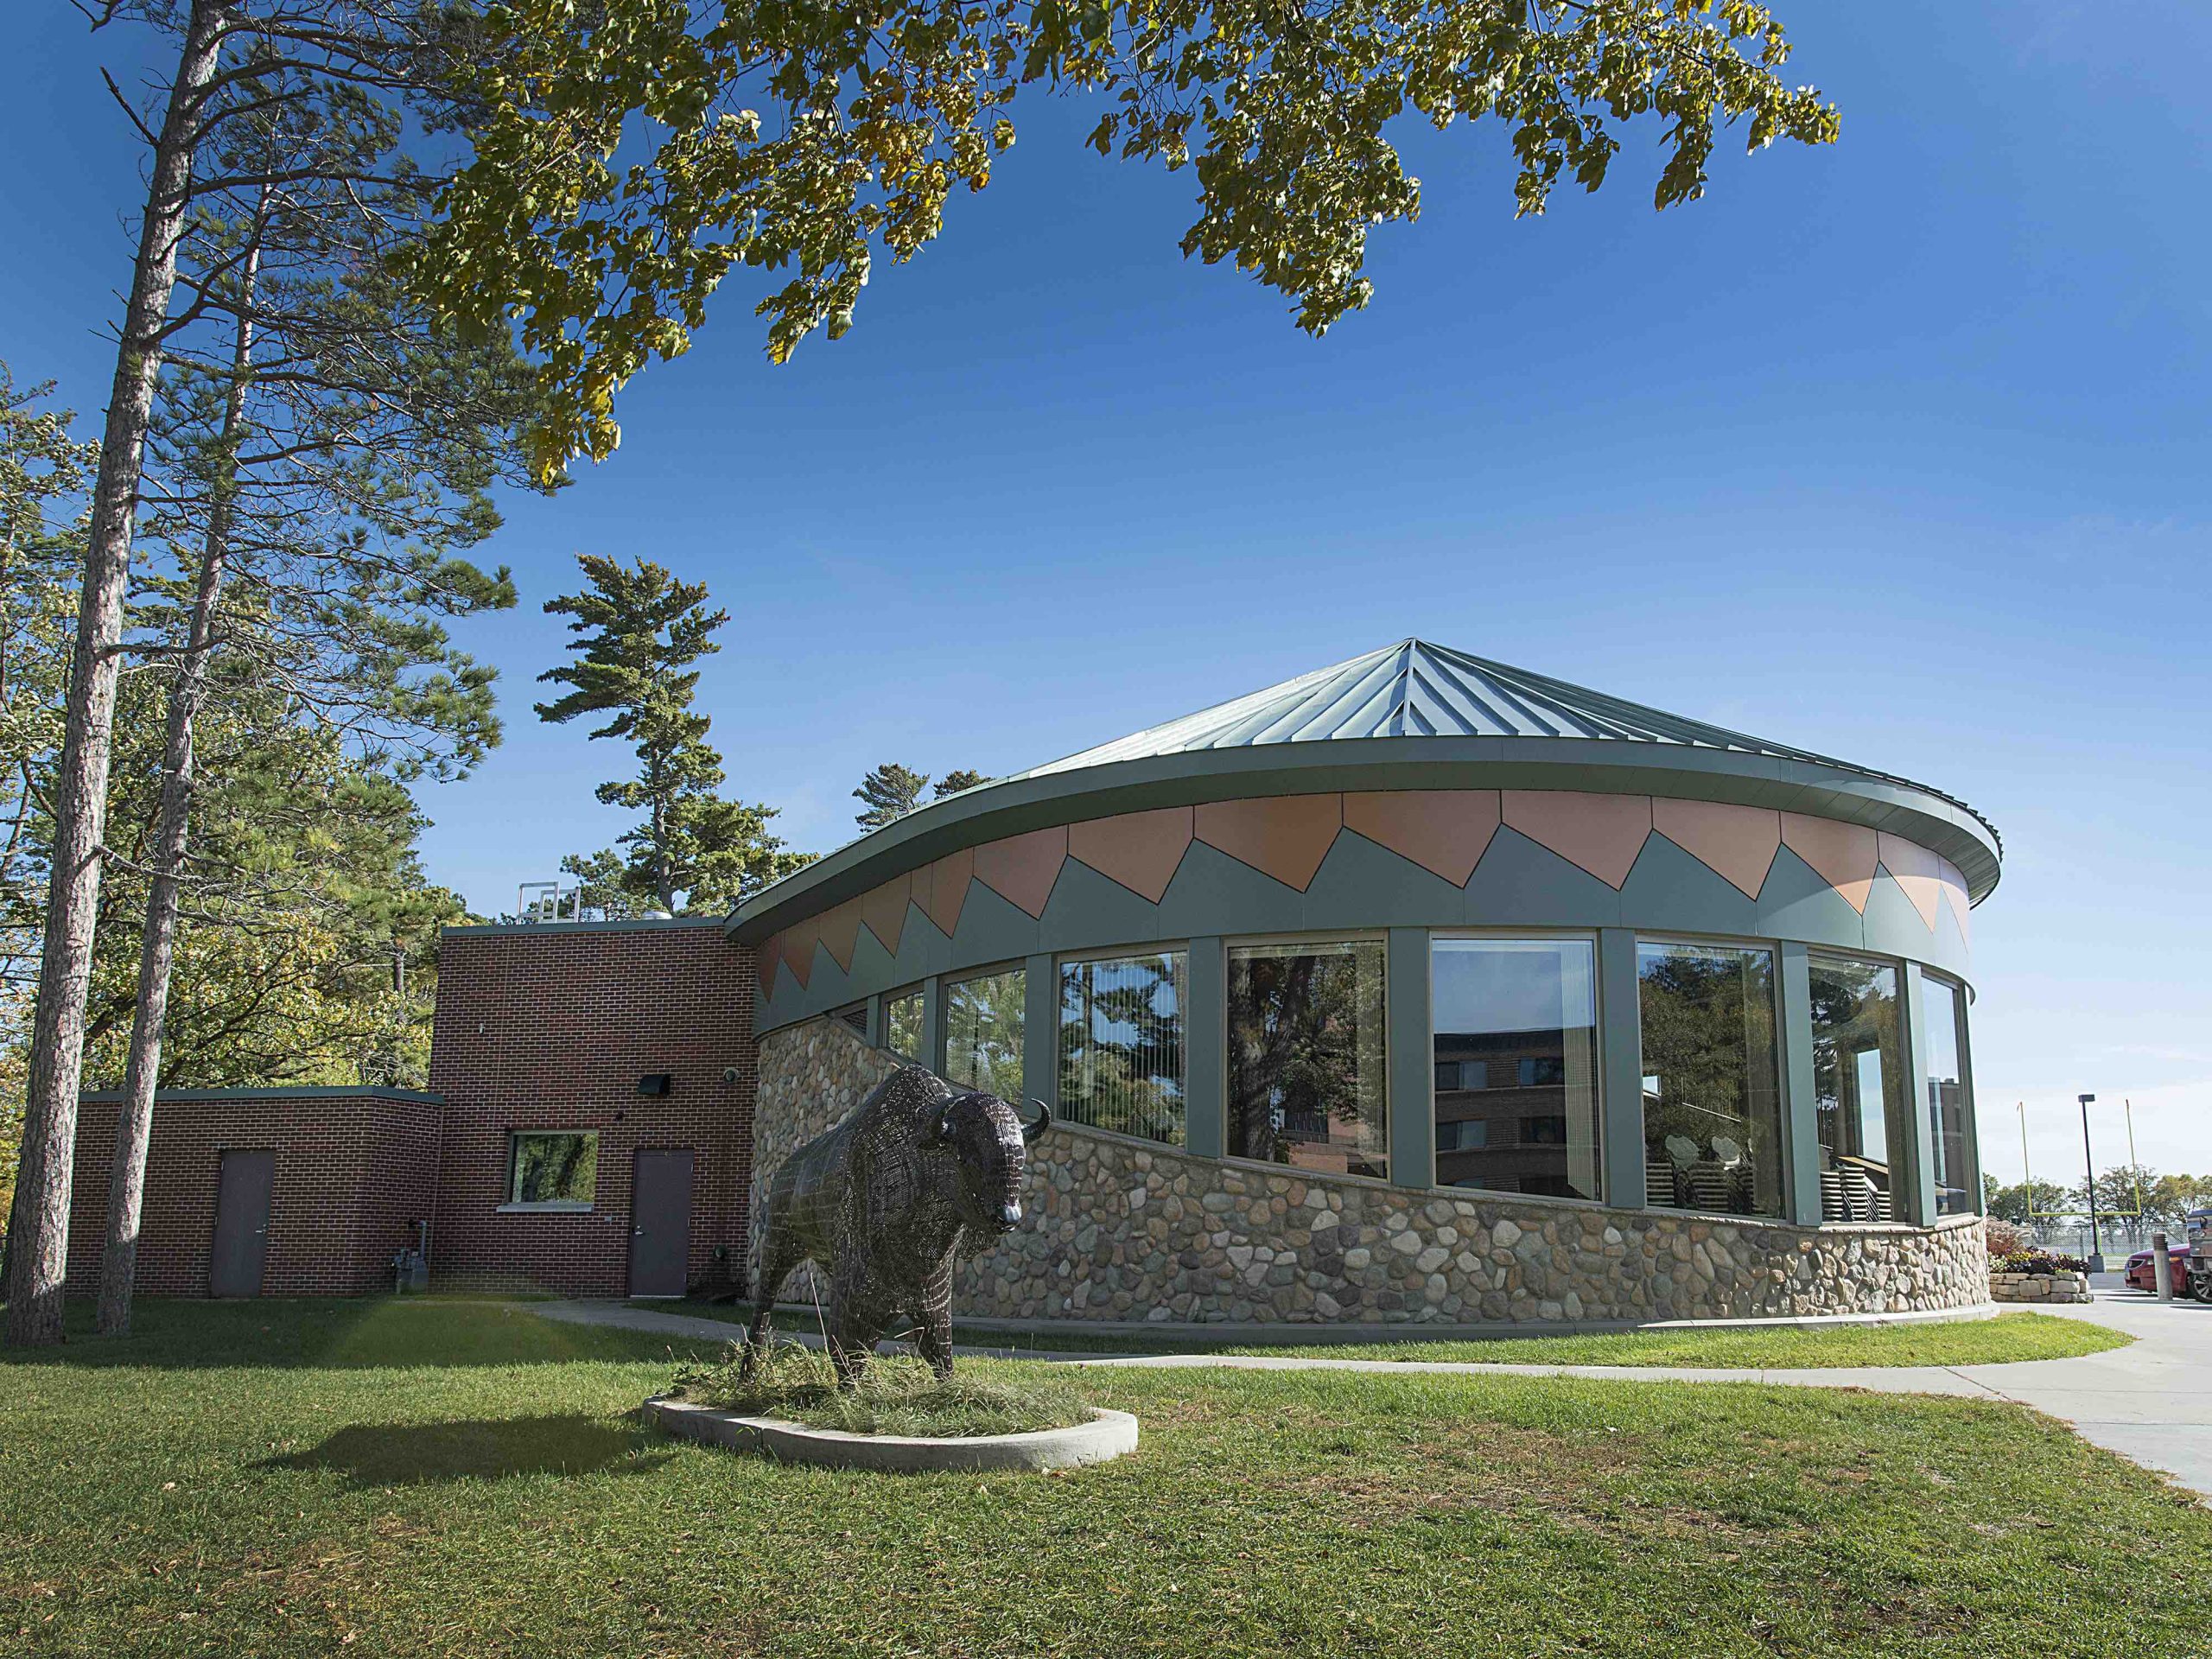 American Indian Resource Center with sculpture of bison in front